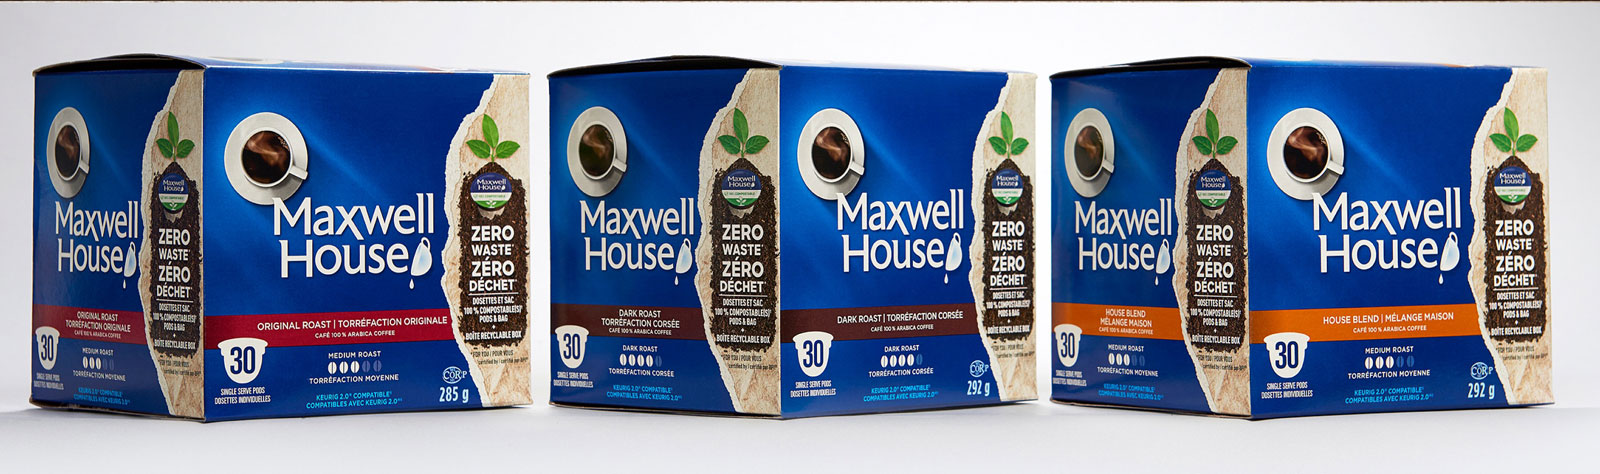 Maxwell house zero waste packaging on a white background